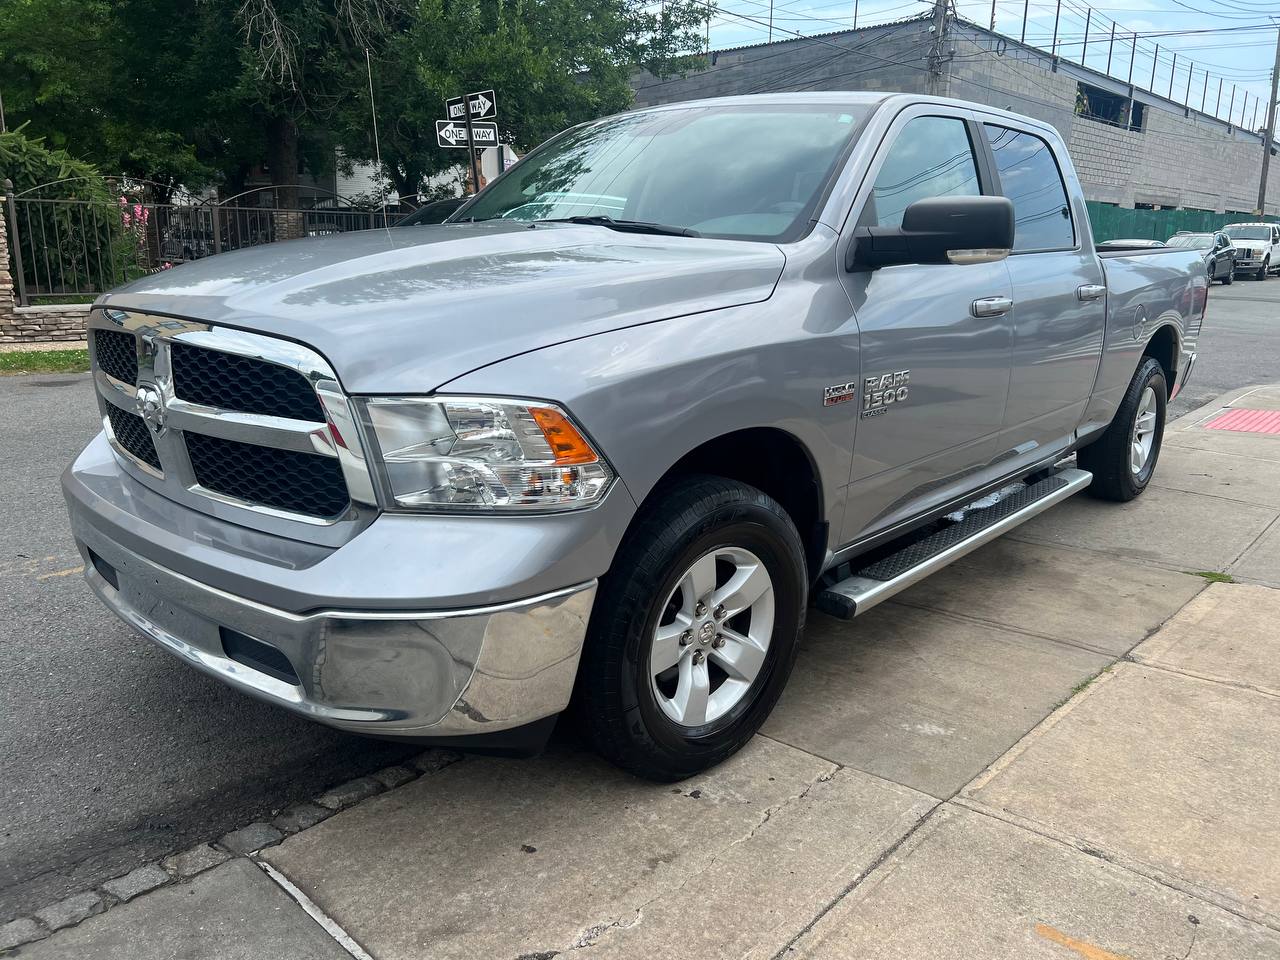 Used Car - 2020 RAM 1500 Cassic SLT for Sale in Staten Island, NY